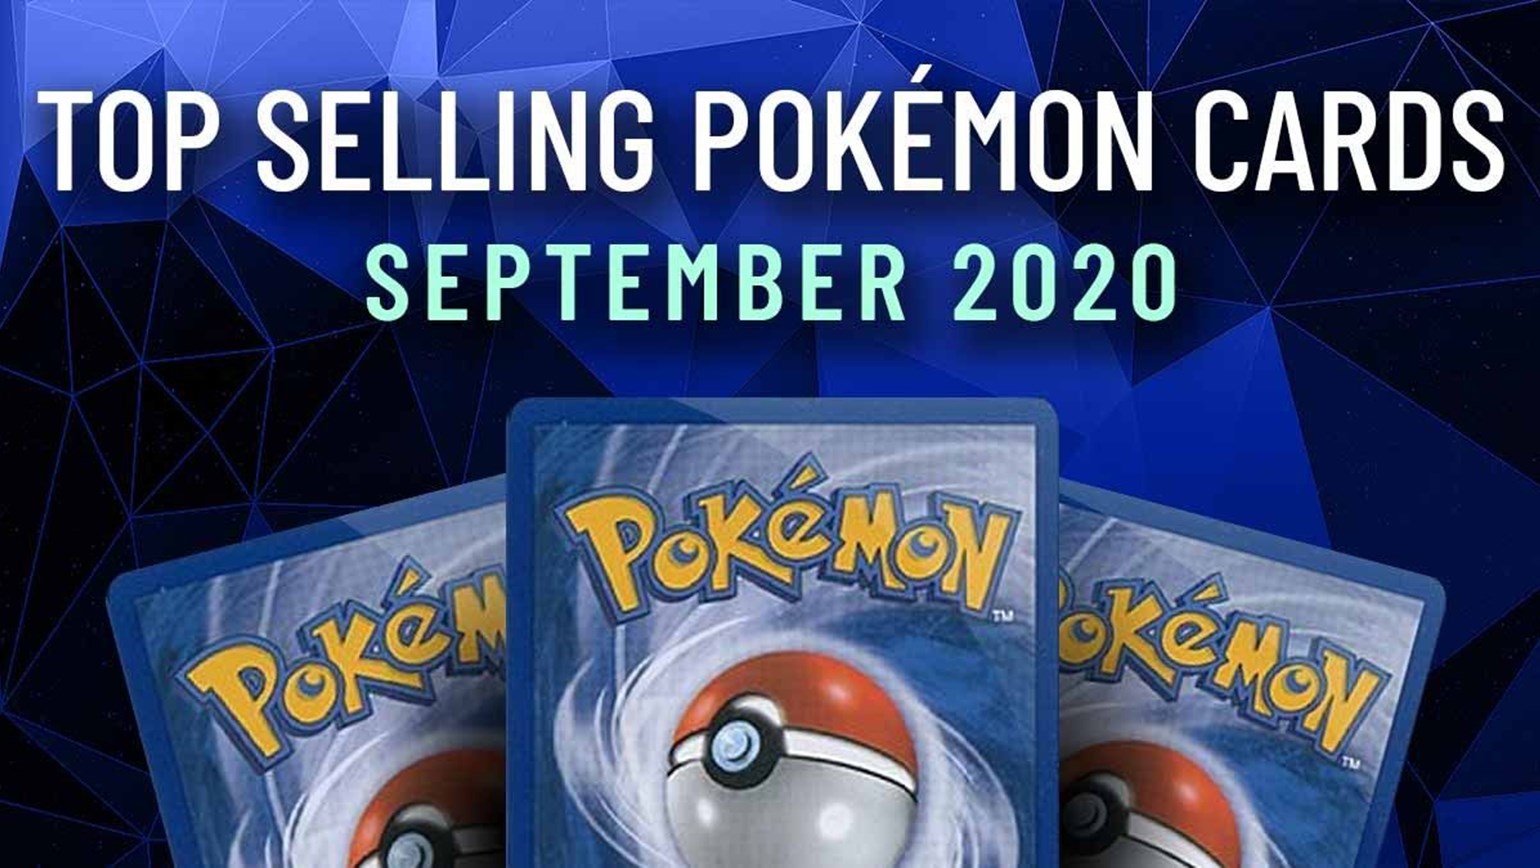 Top Selling Pokémon Cards in September 2020